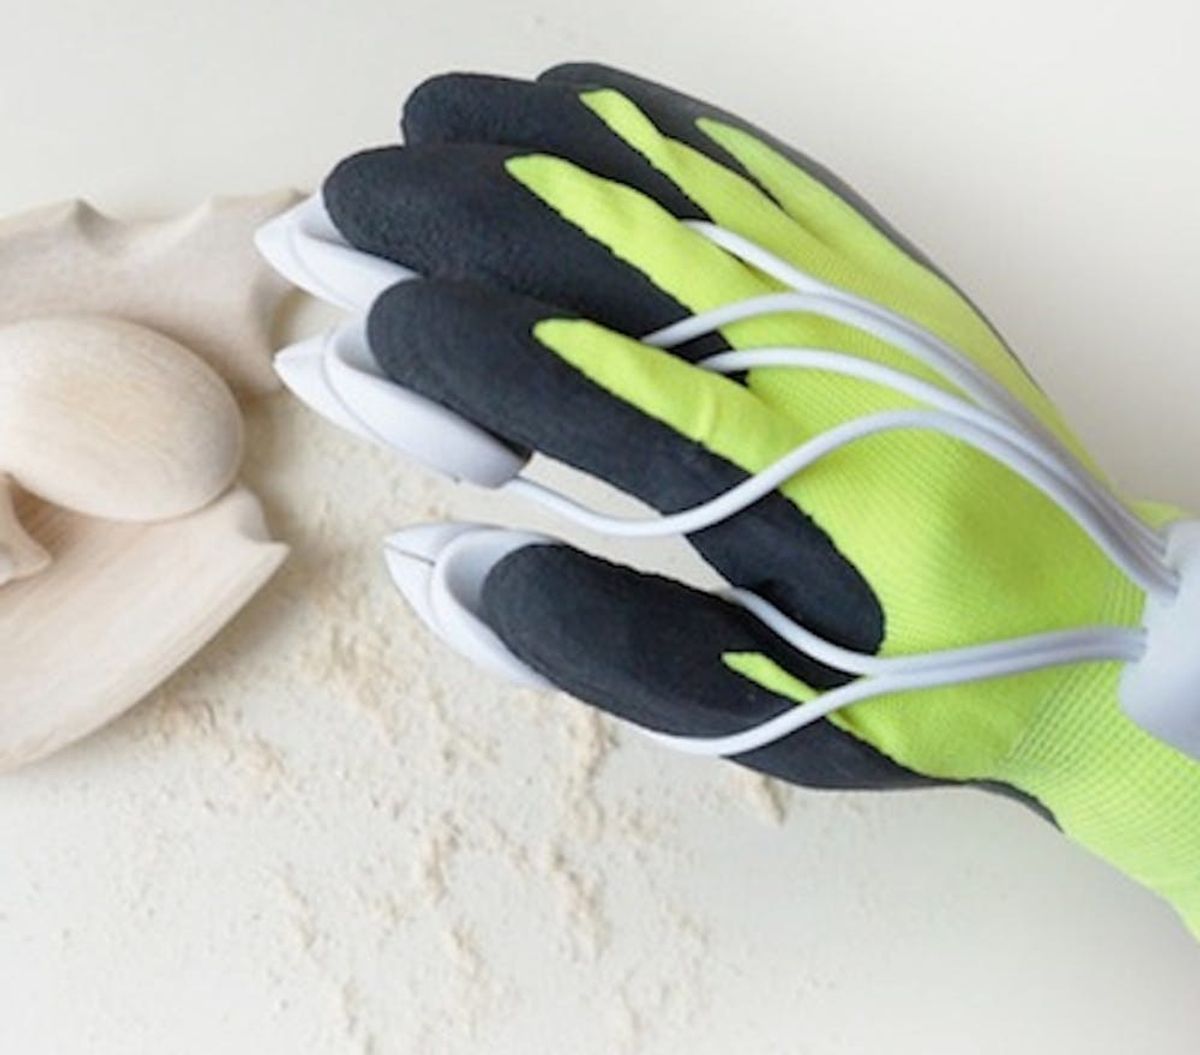 These Weird Gloves Let You Carve Wood and Stone With Your Fingers